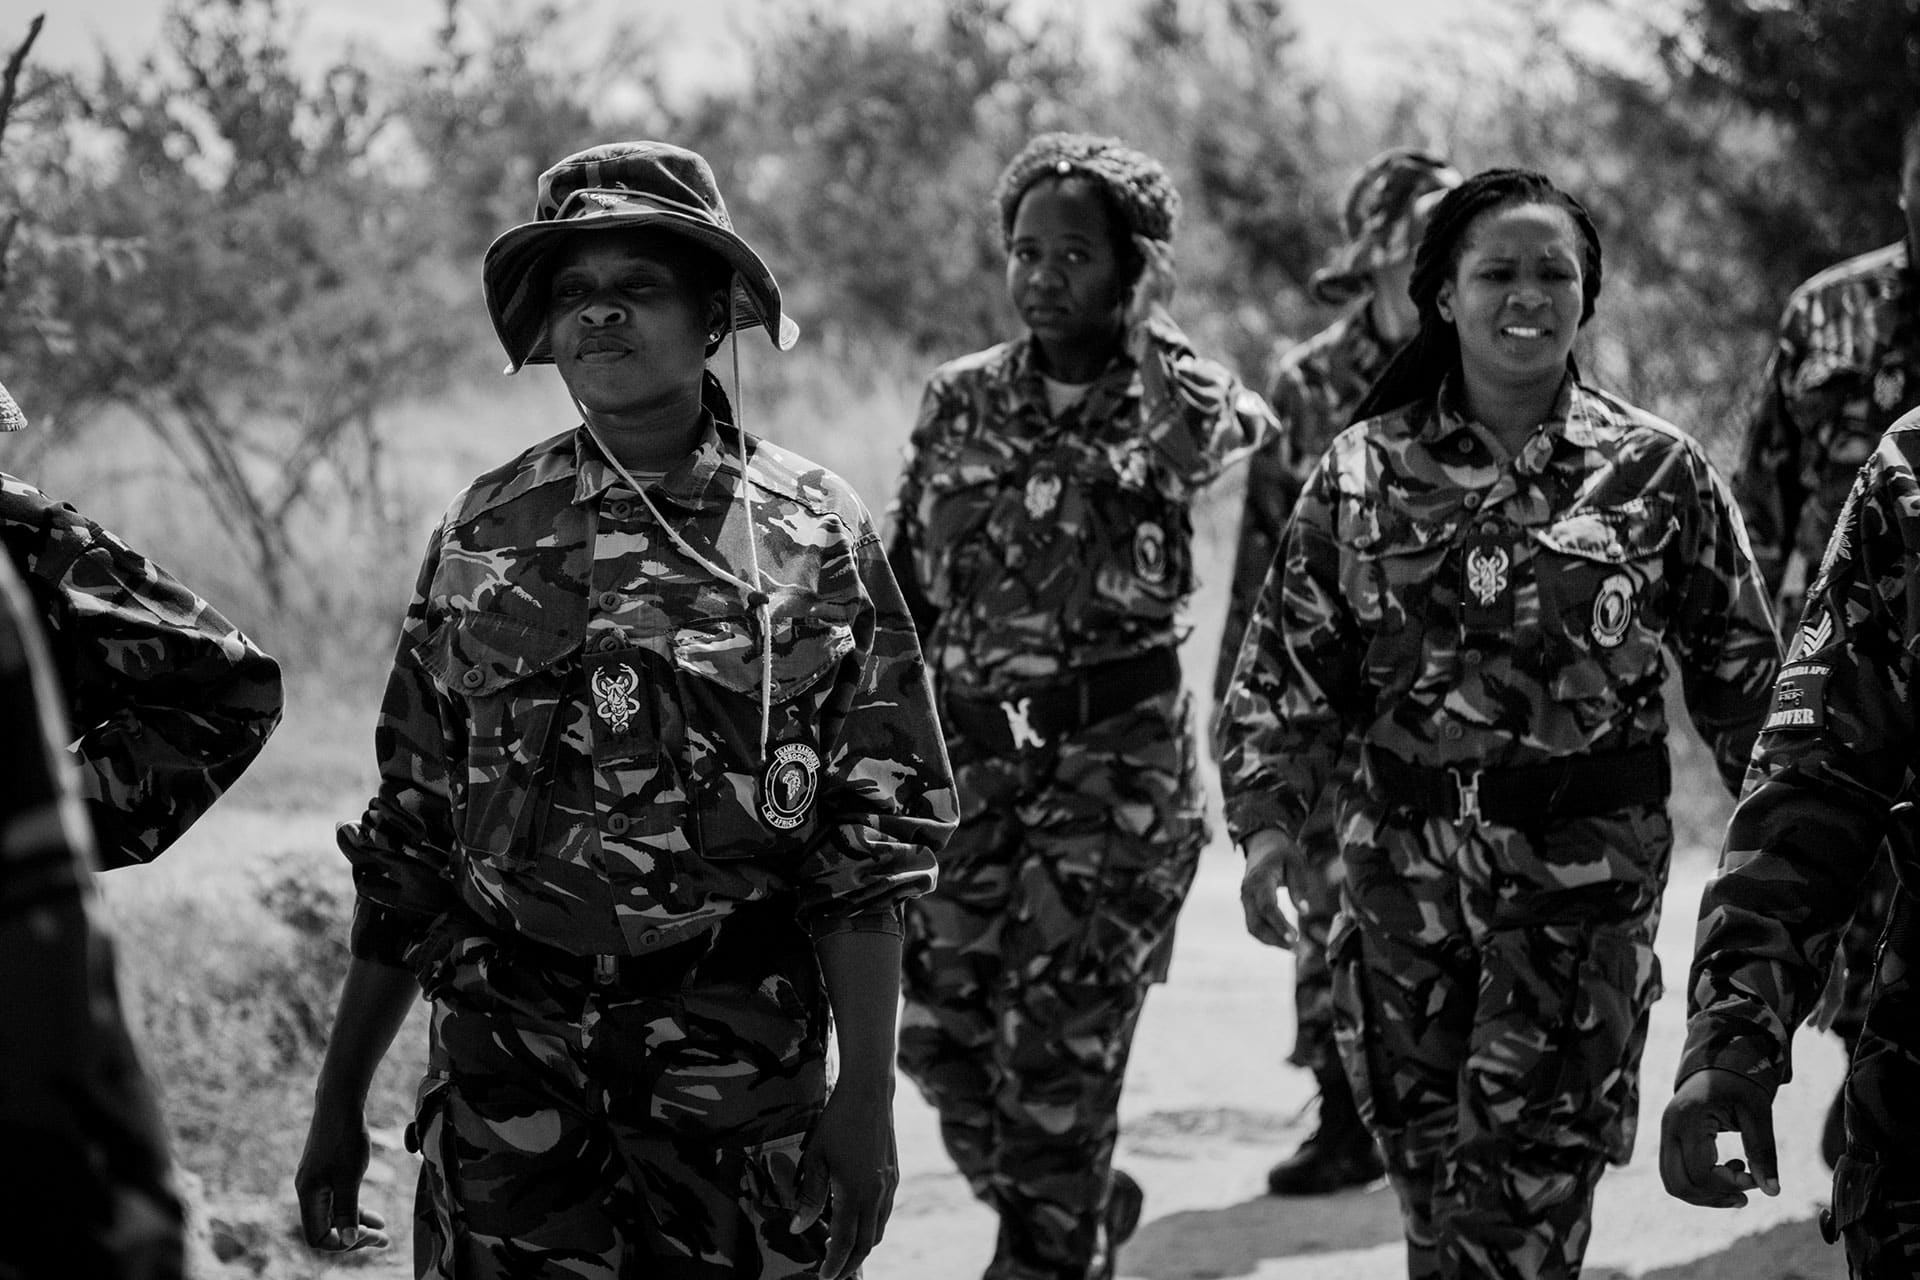 The women of the anti-poaching unit patrolling the landscape. Conservation in South Africa